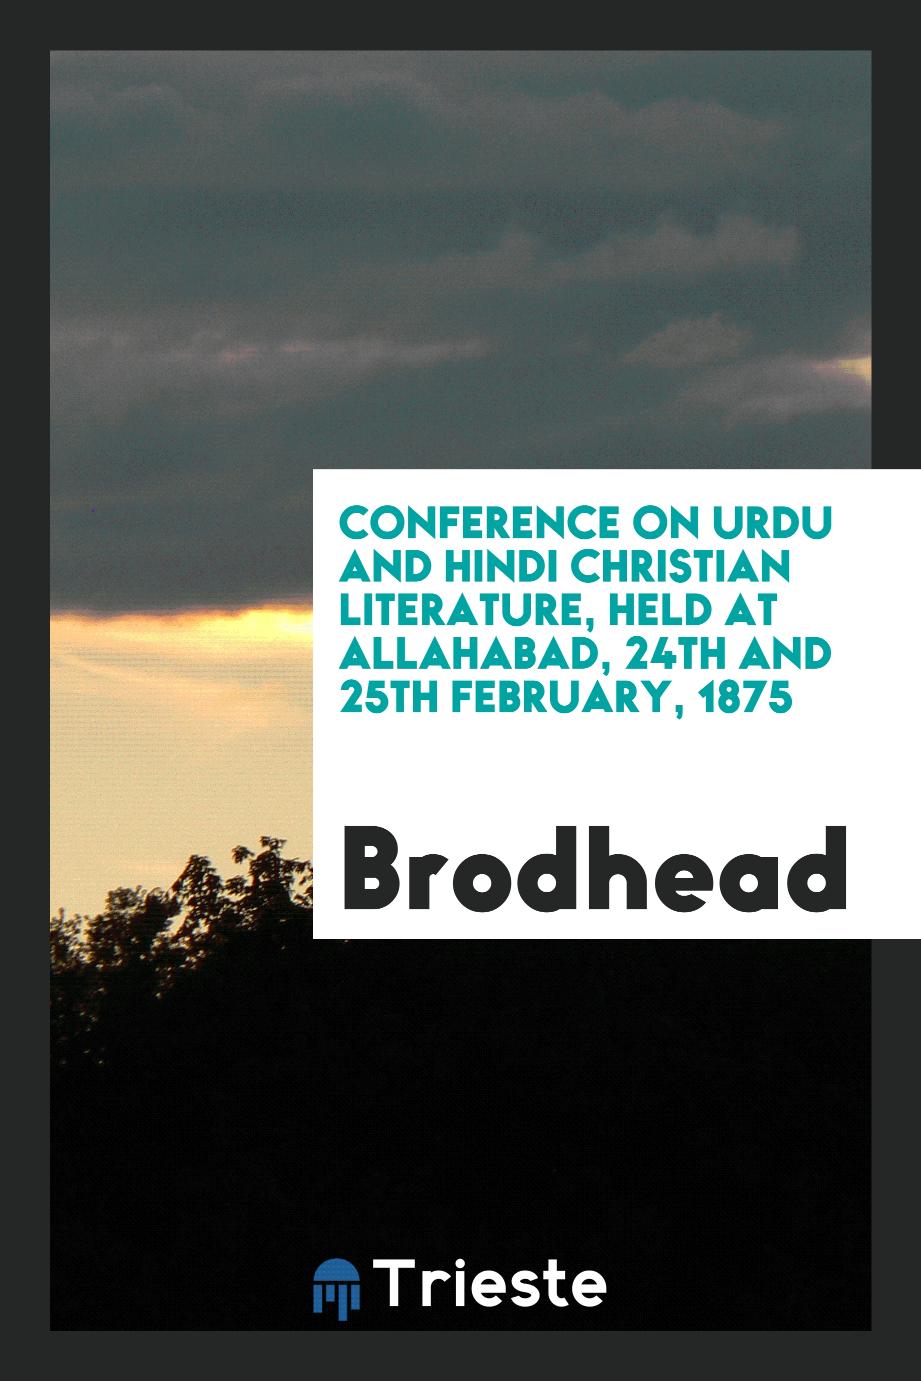 Conference on Urdu and Hindi Christian Literature, Held at Allahabad, 24th and 25th February, 1875